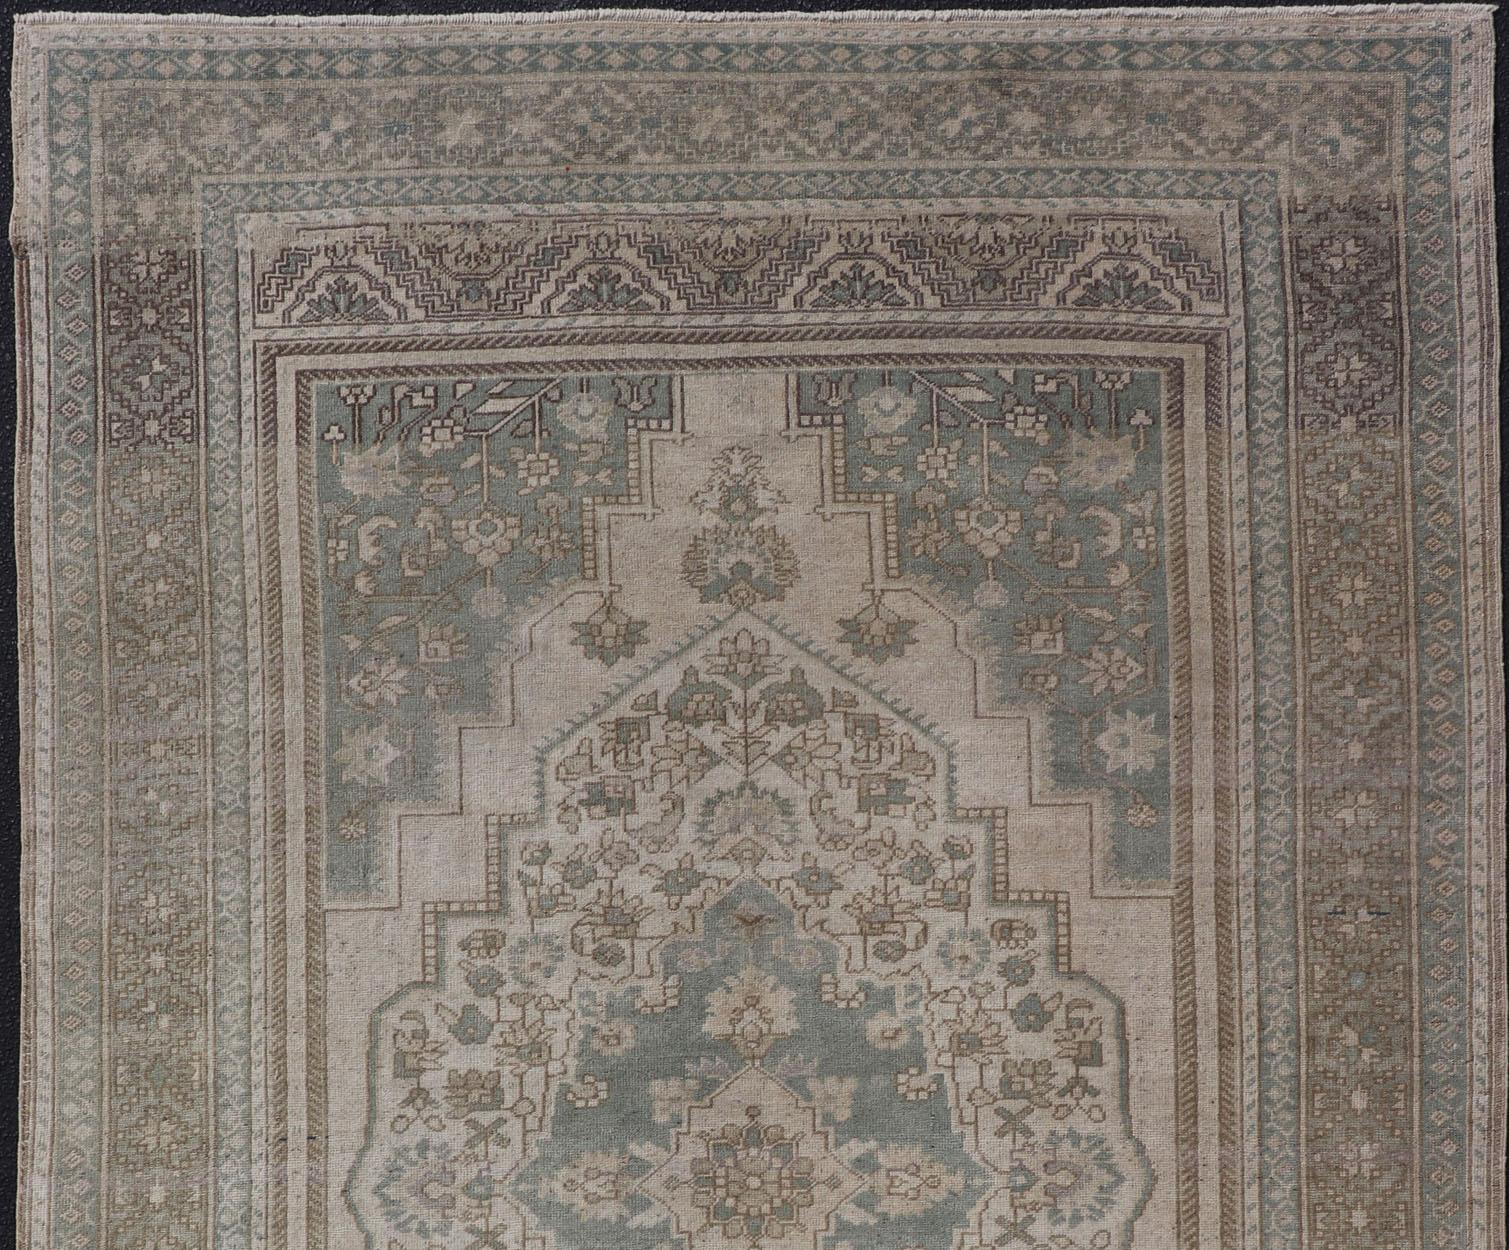 Turkish Oushak Vintage Medallion Rug in Light Blue-Green, Tan, Taupe, and Cream For Sale 2